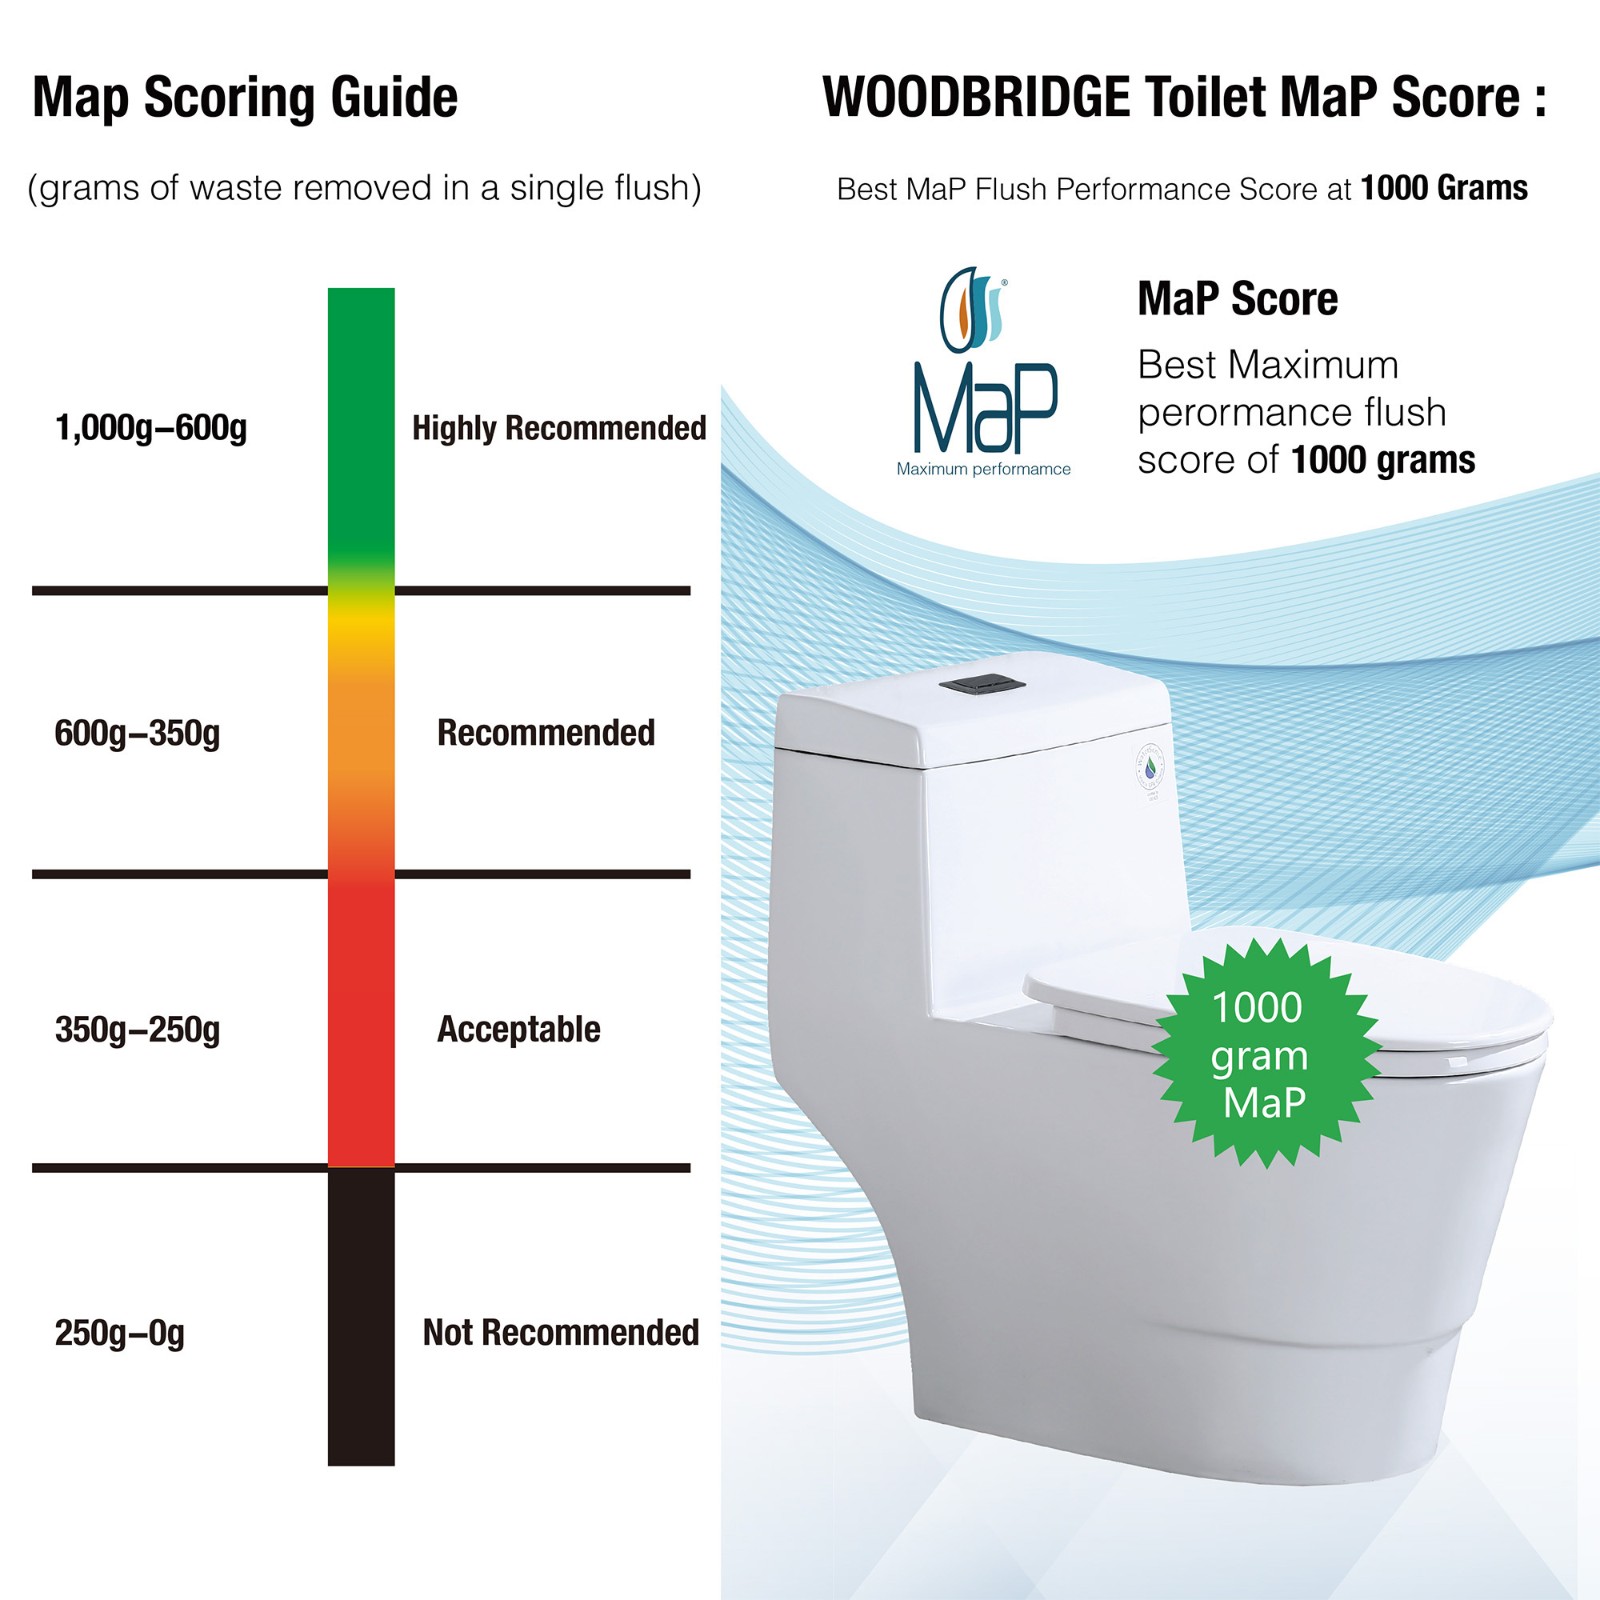  WOODBRIDGEE One Piece Toilet with Soft Closing Seat, Chair Height, 1.28 GPF Dual, Water Sensed, 1000 Gram MaP Flushing Score Toilet with Matte Black Button T0001-MB, White_7660